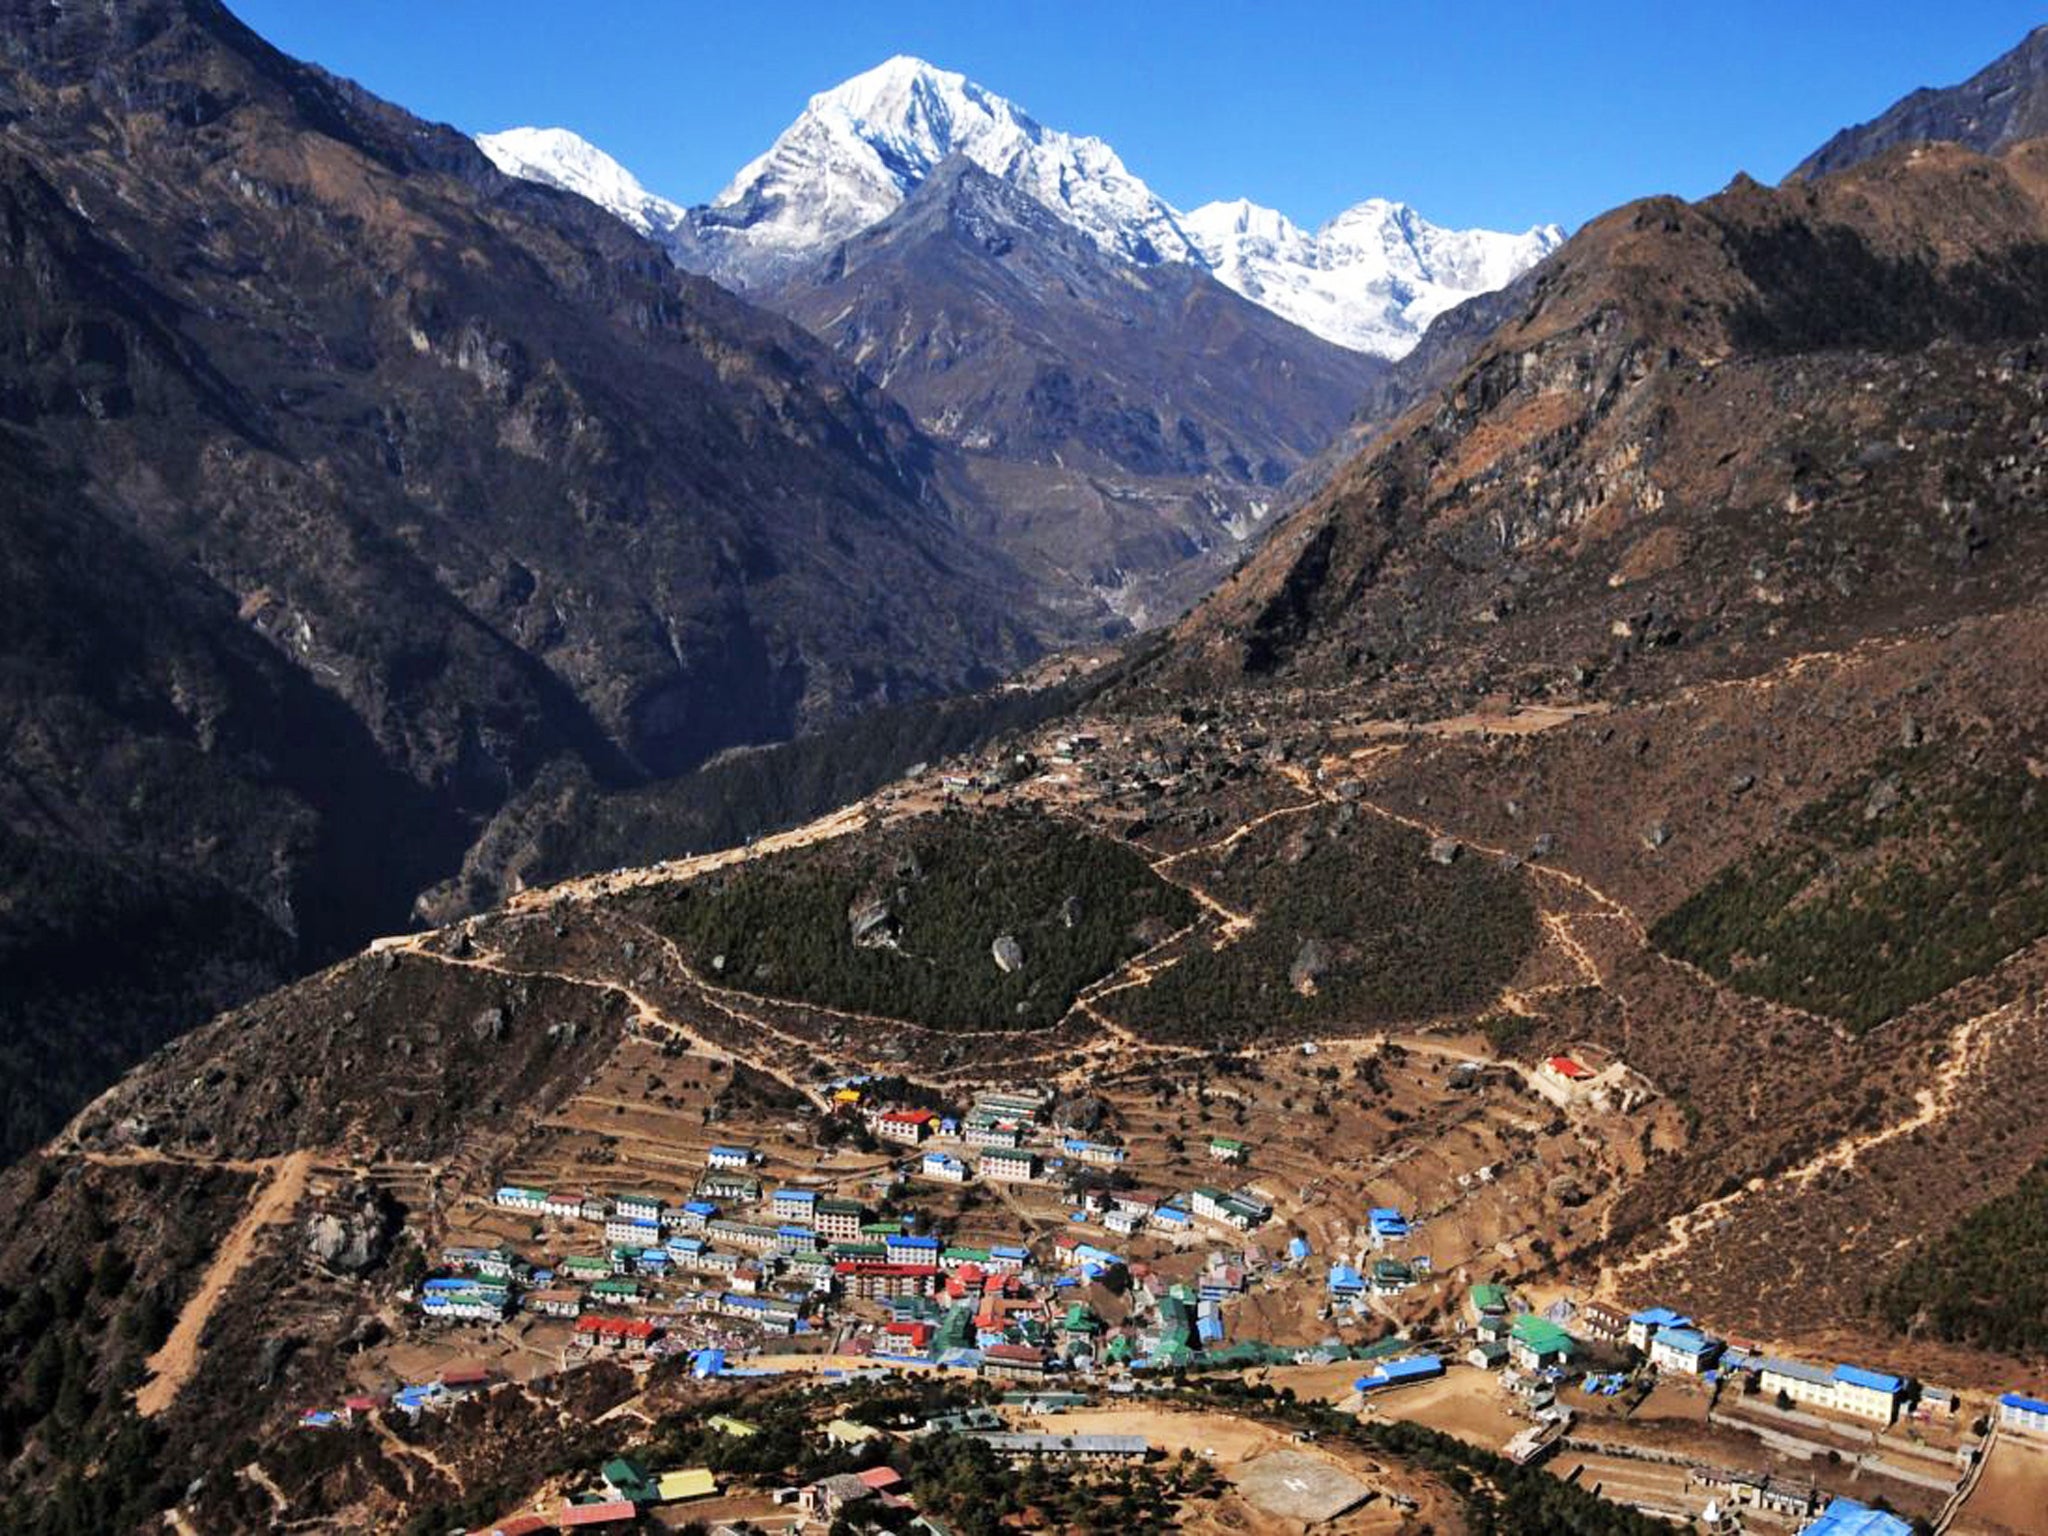 Natural high: hiking in Nepal was a highlight for Larry Lamb